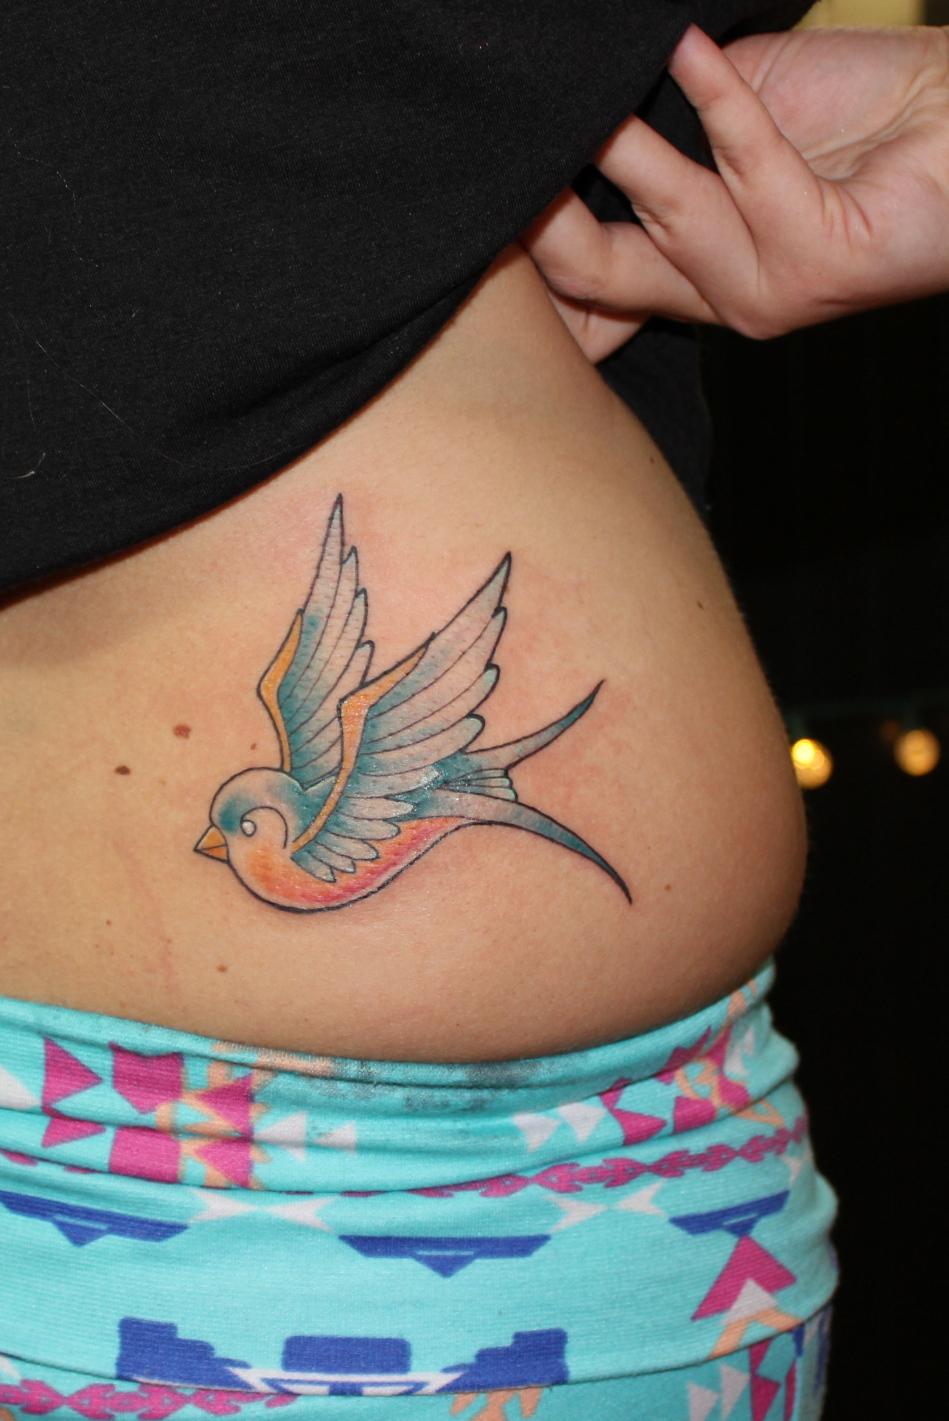 Swallow Tattoos Designs, Ideas and Meaning - Tattoos For You